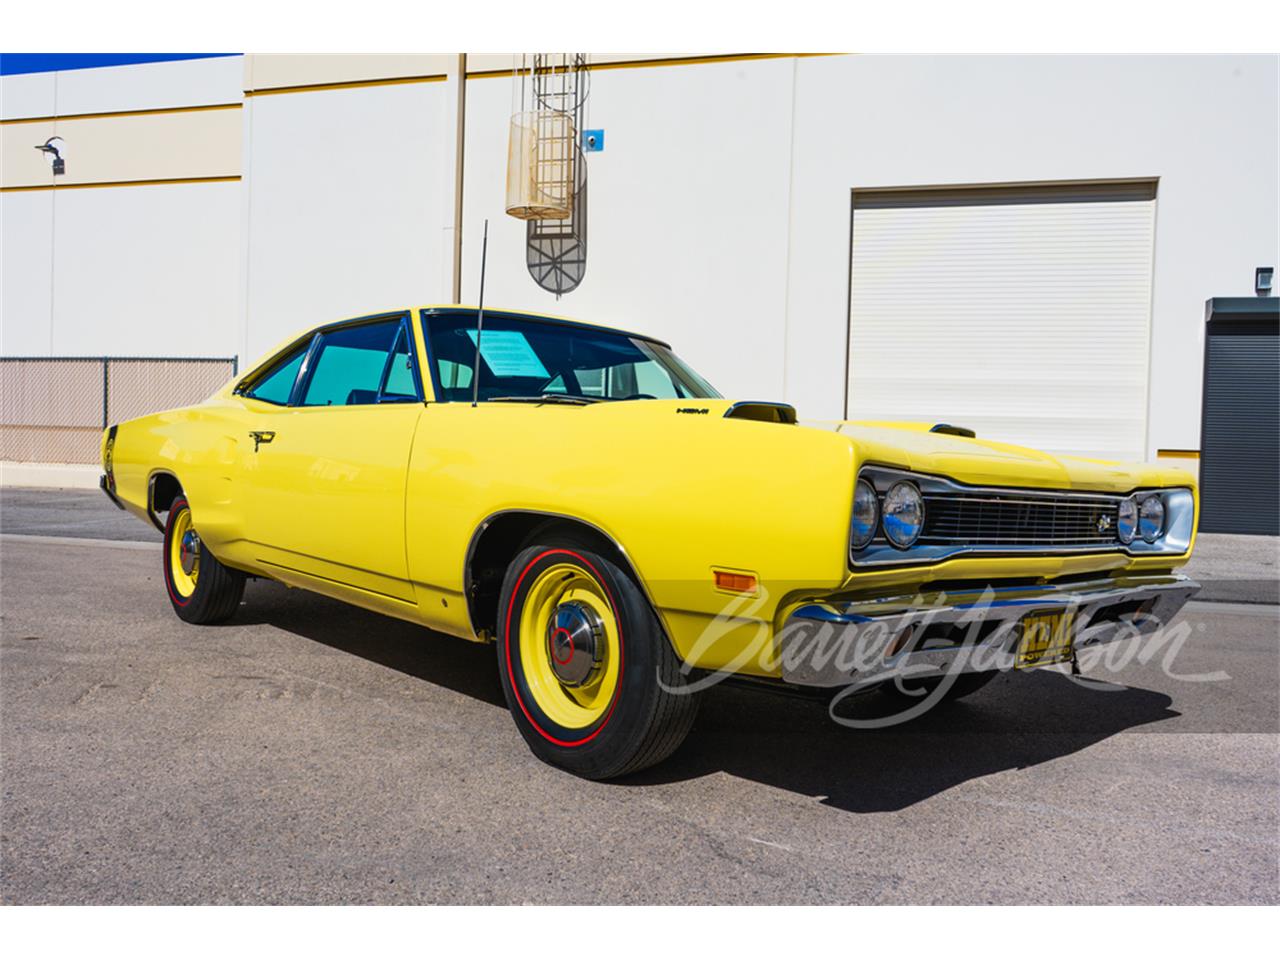 For Sale at Auction: 1969 Dodge Super Bee in Scottsdale, Arizona for sale in Scottsdale, AZ